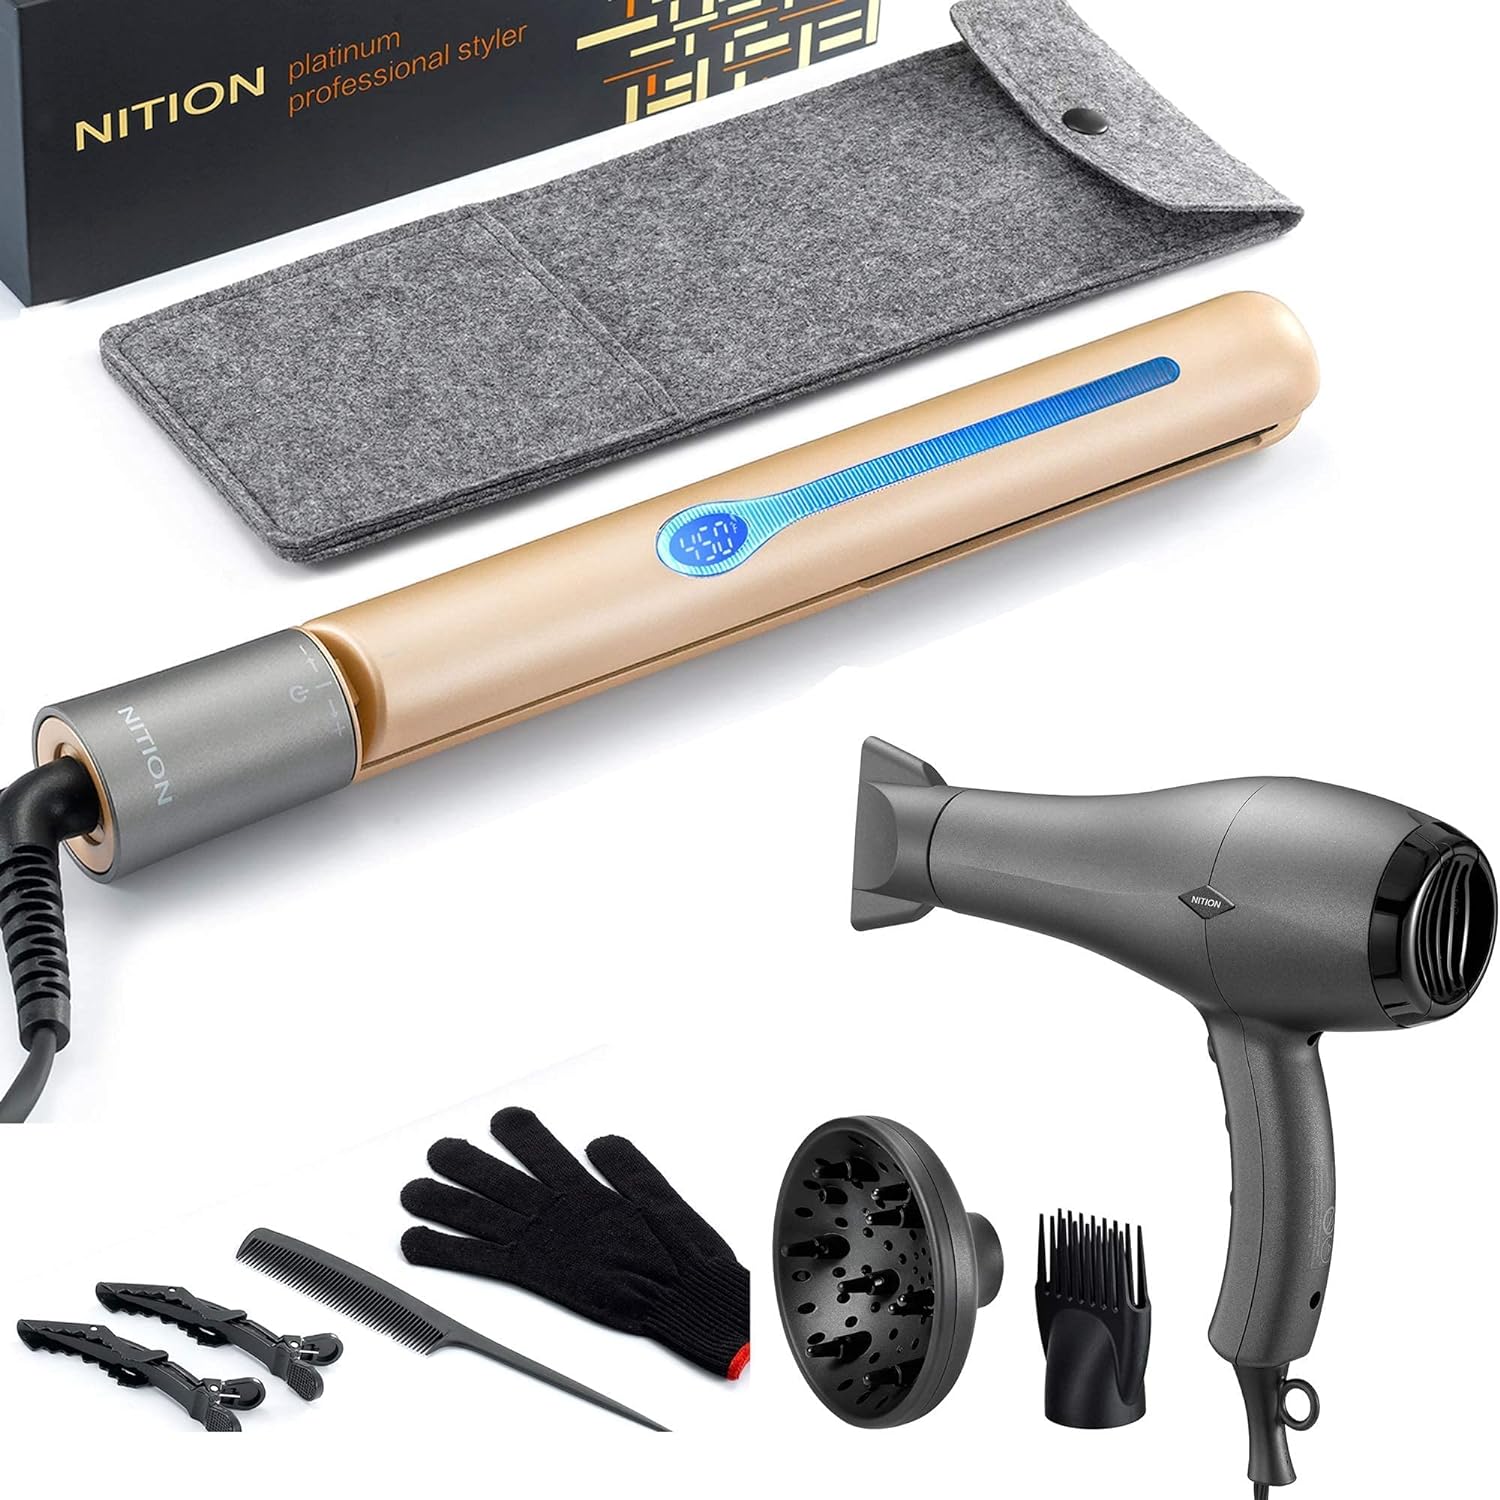 NITION Pro Salon Hair Straightener Flat Iron Gold and Black Hair Dryer with 3 Attachments Diffuser/Comb Set